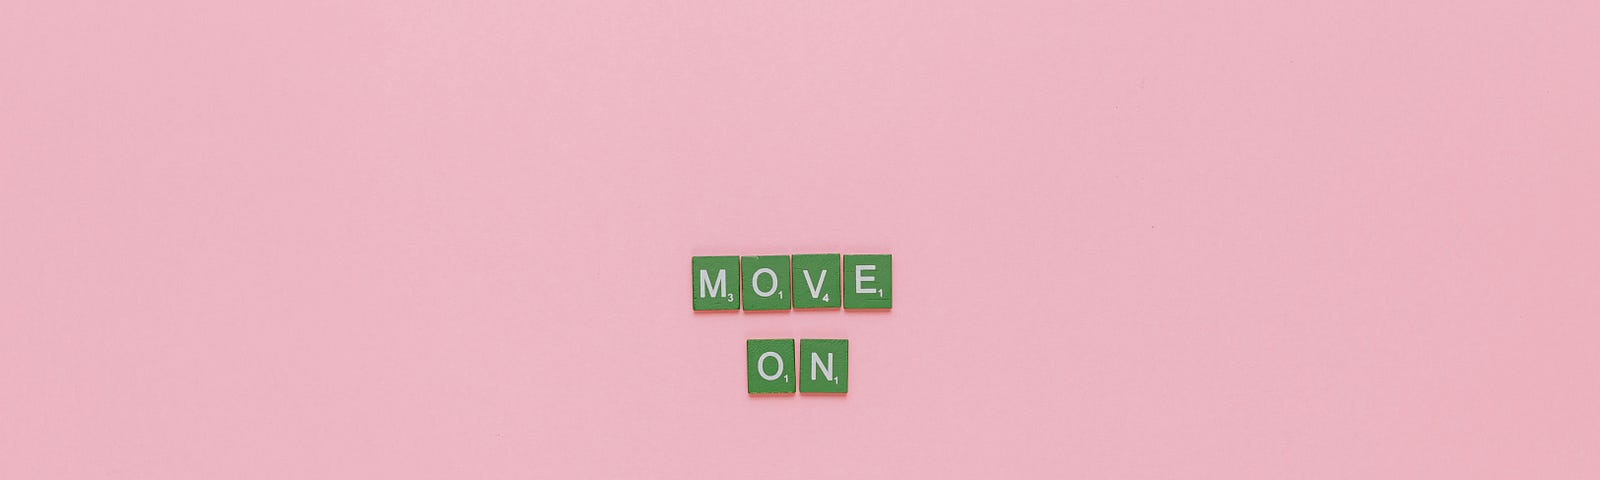 Very small, against a pink background, the words “Move On,” spelled out in Scrabble-type tiles.